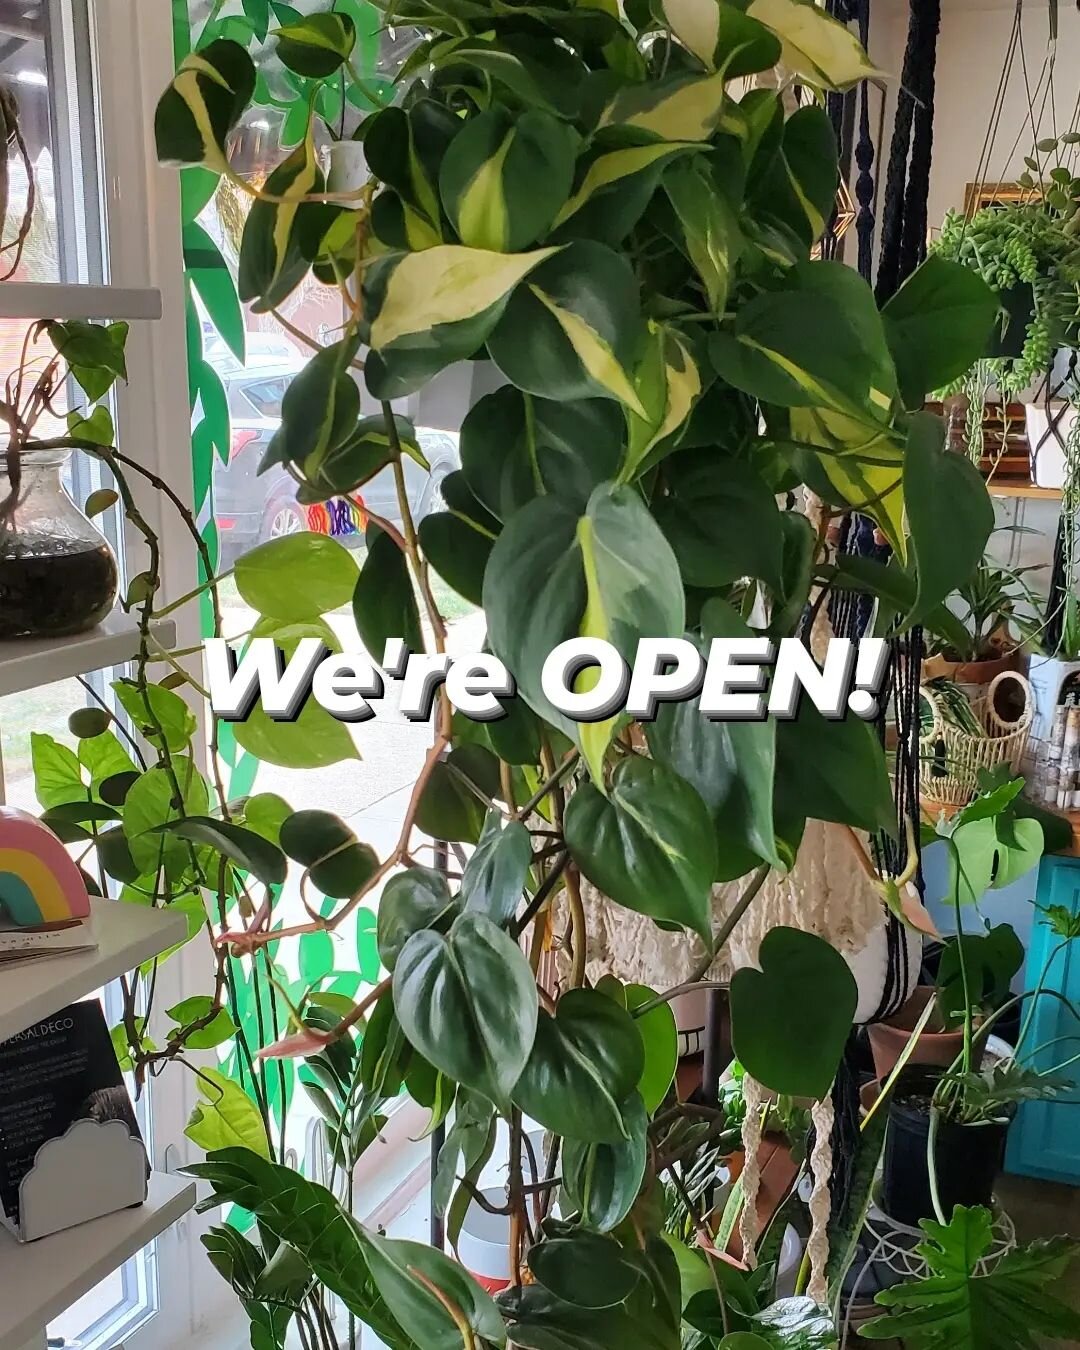 That was a fun little storm, eh? ⛄️ 
Now back to our regularly scheduled program...

Come see what plants are hanging around looking for sweet new homes, we got two deliveries last week and tons of new plant babies. Whats on your wishlist? 💚

#philo